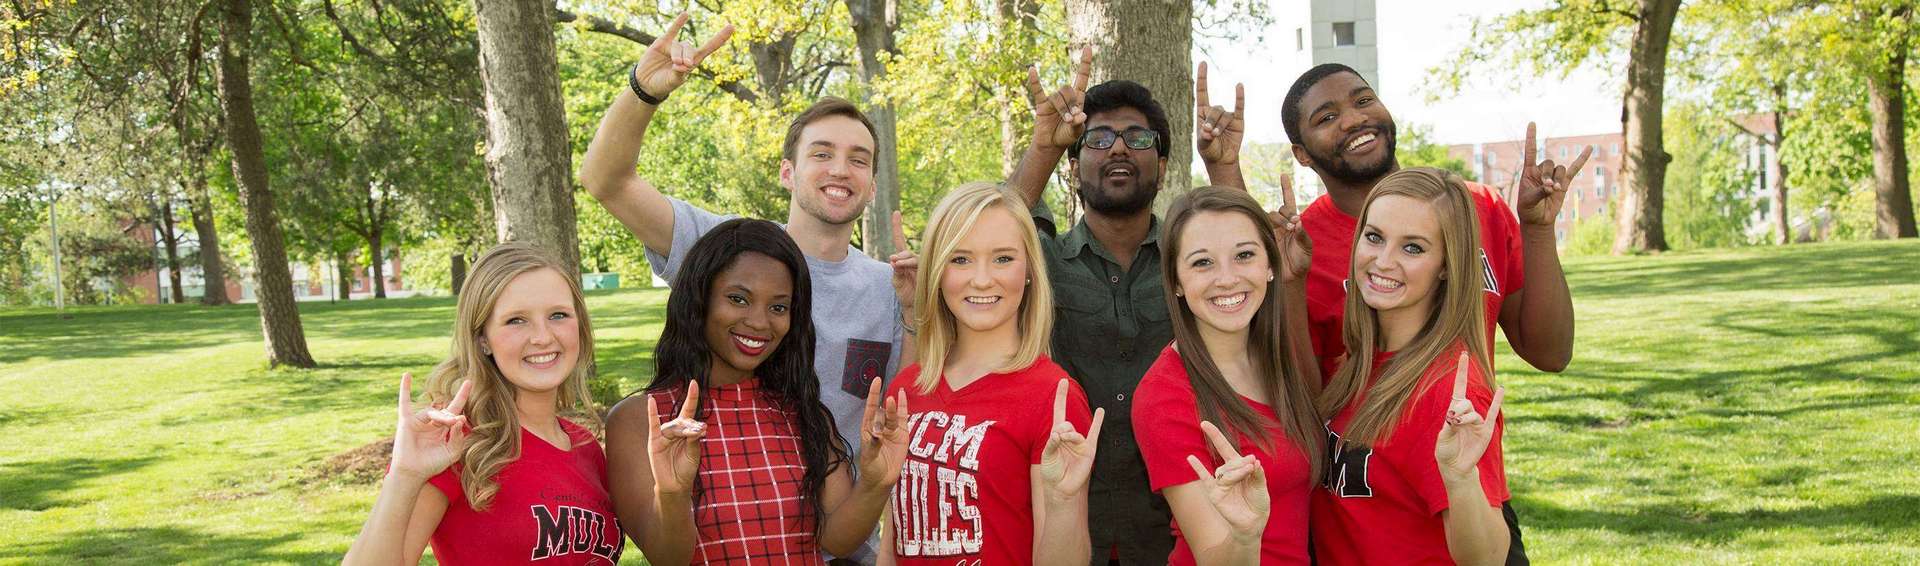 Students make the "snouts out" hand signal